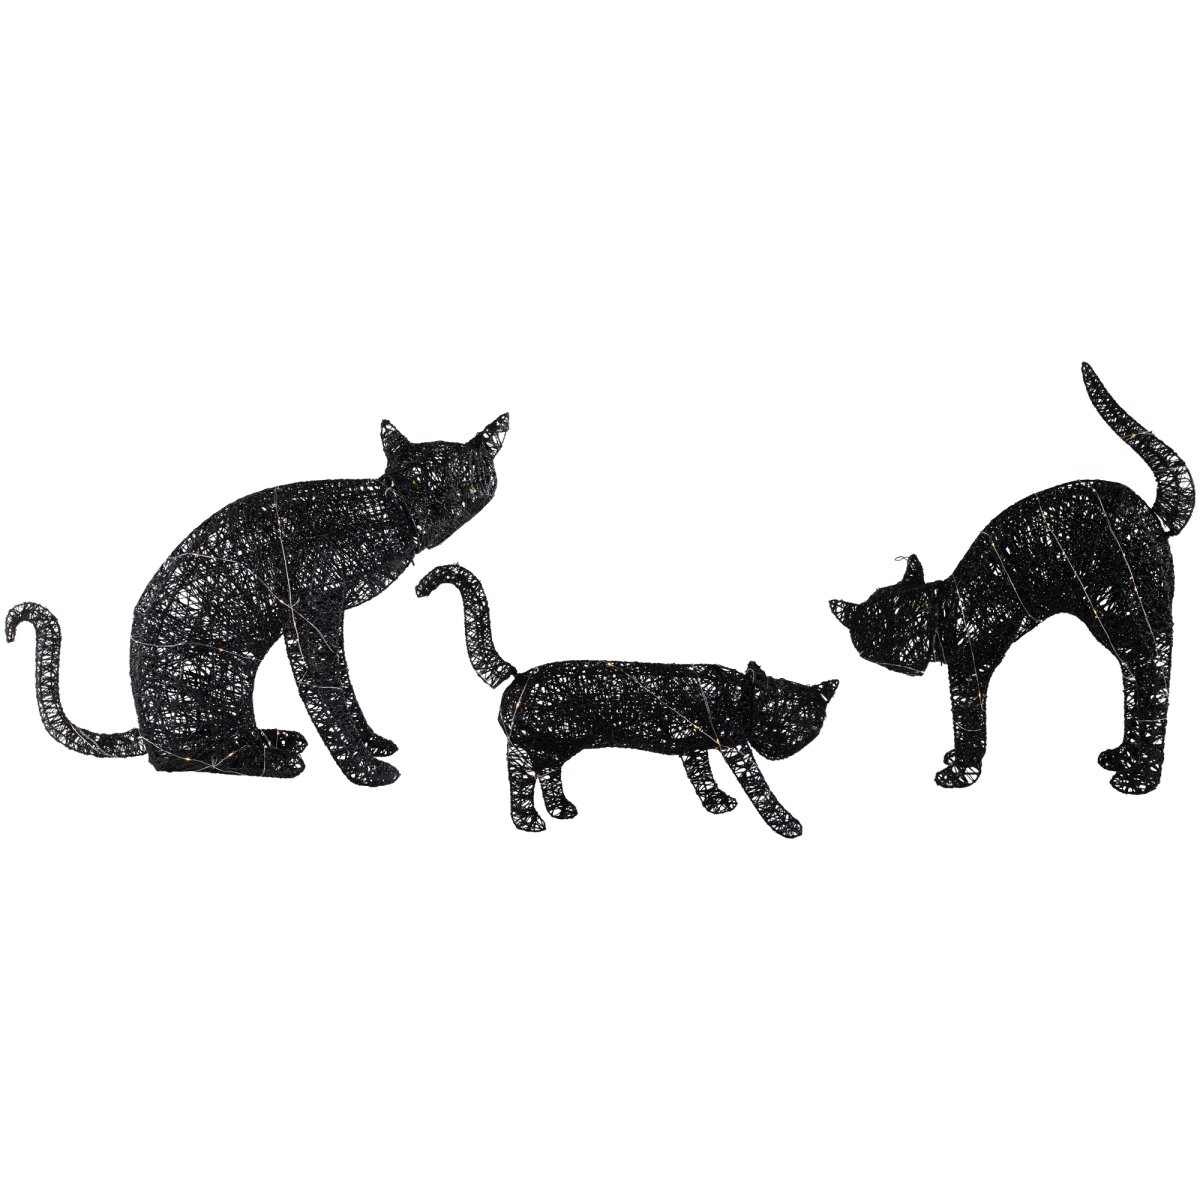 Picture of Northlight 35250589 LED Lighted Cat Family Outdoor Halloween Decorations - 27.5 in., Black - Set of 3